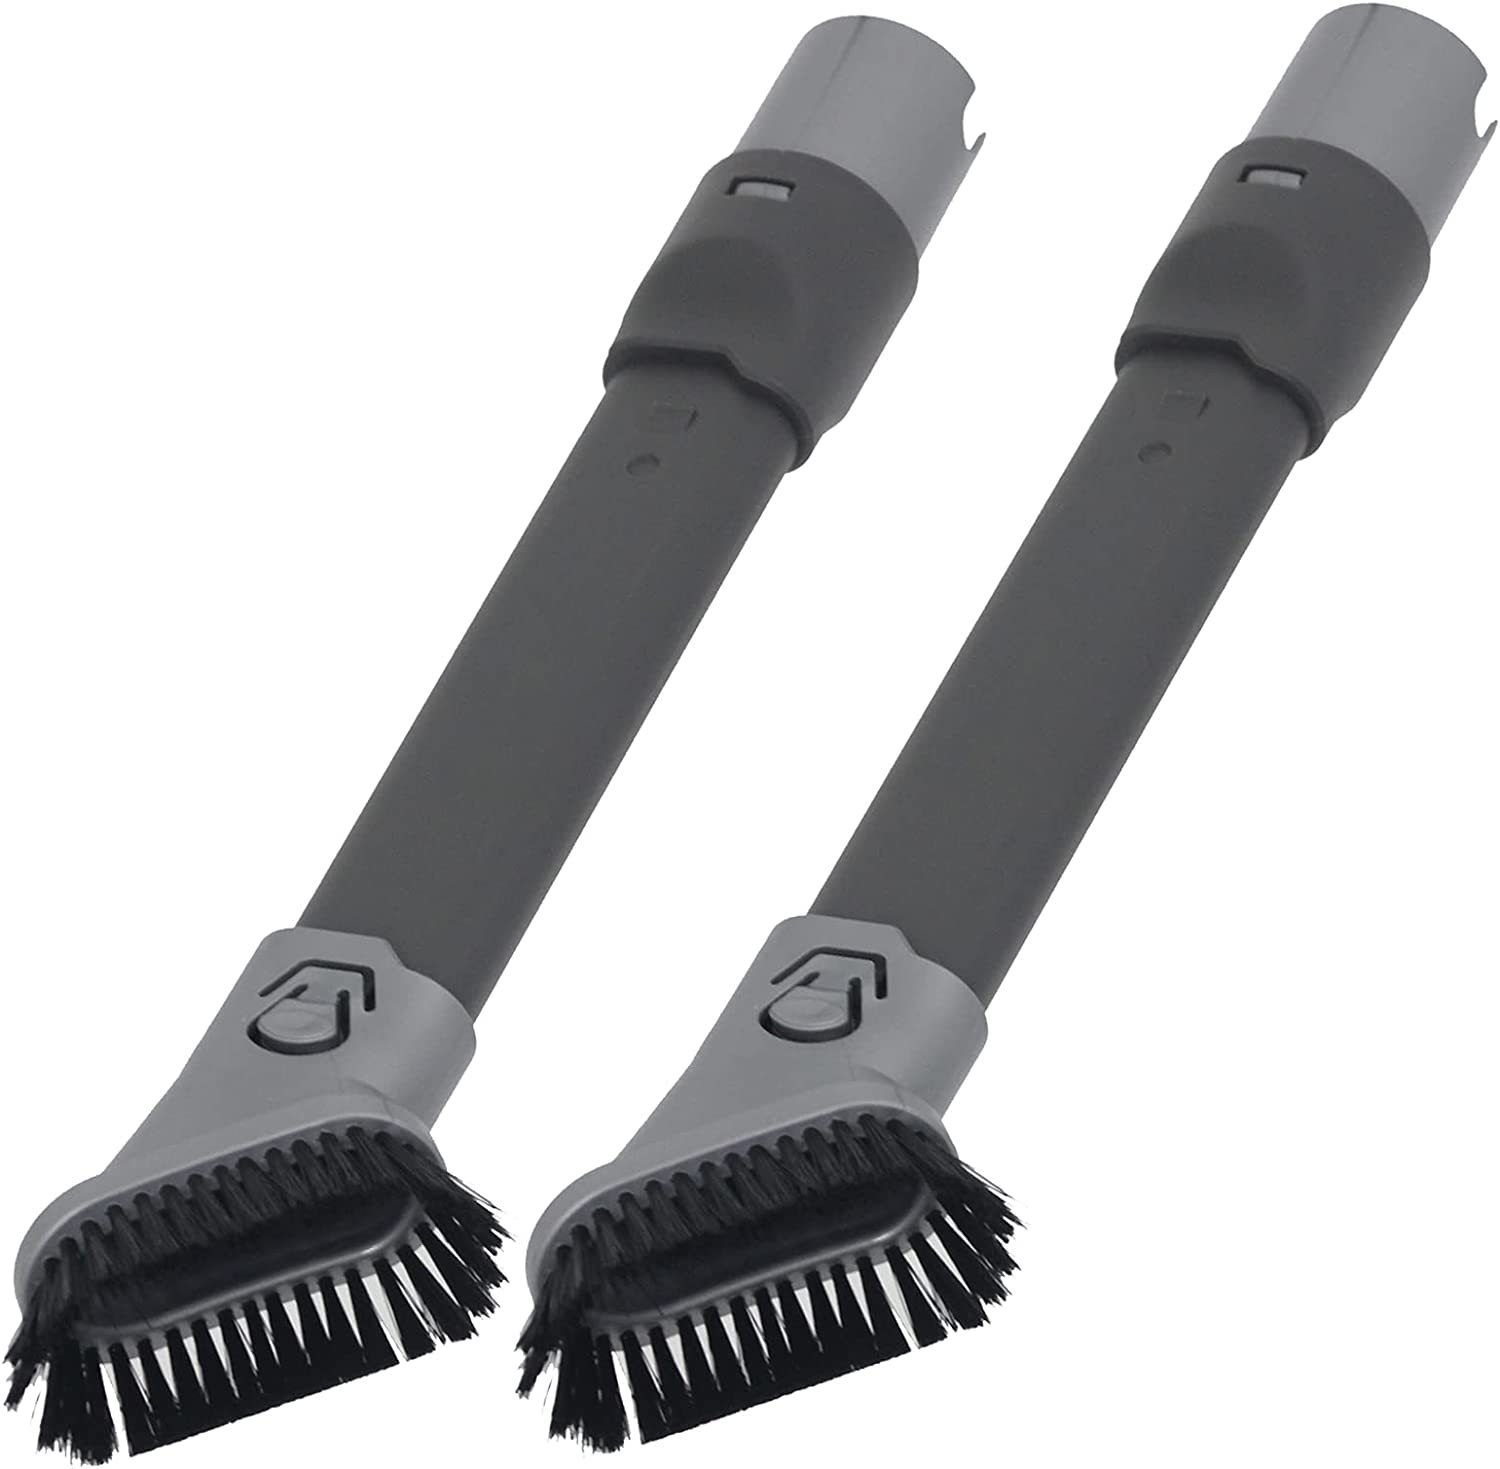 2-in-1 Dusting Brush Crevice Tool for Shark Rotator Lift-Away Vacuum Cleaner (Pack of 2)